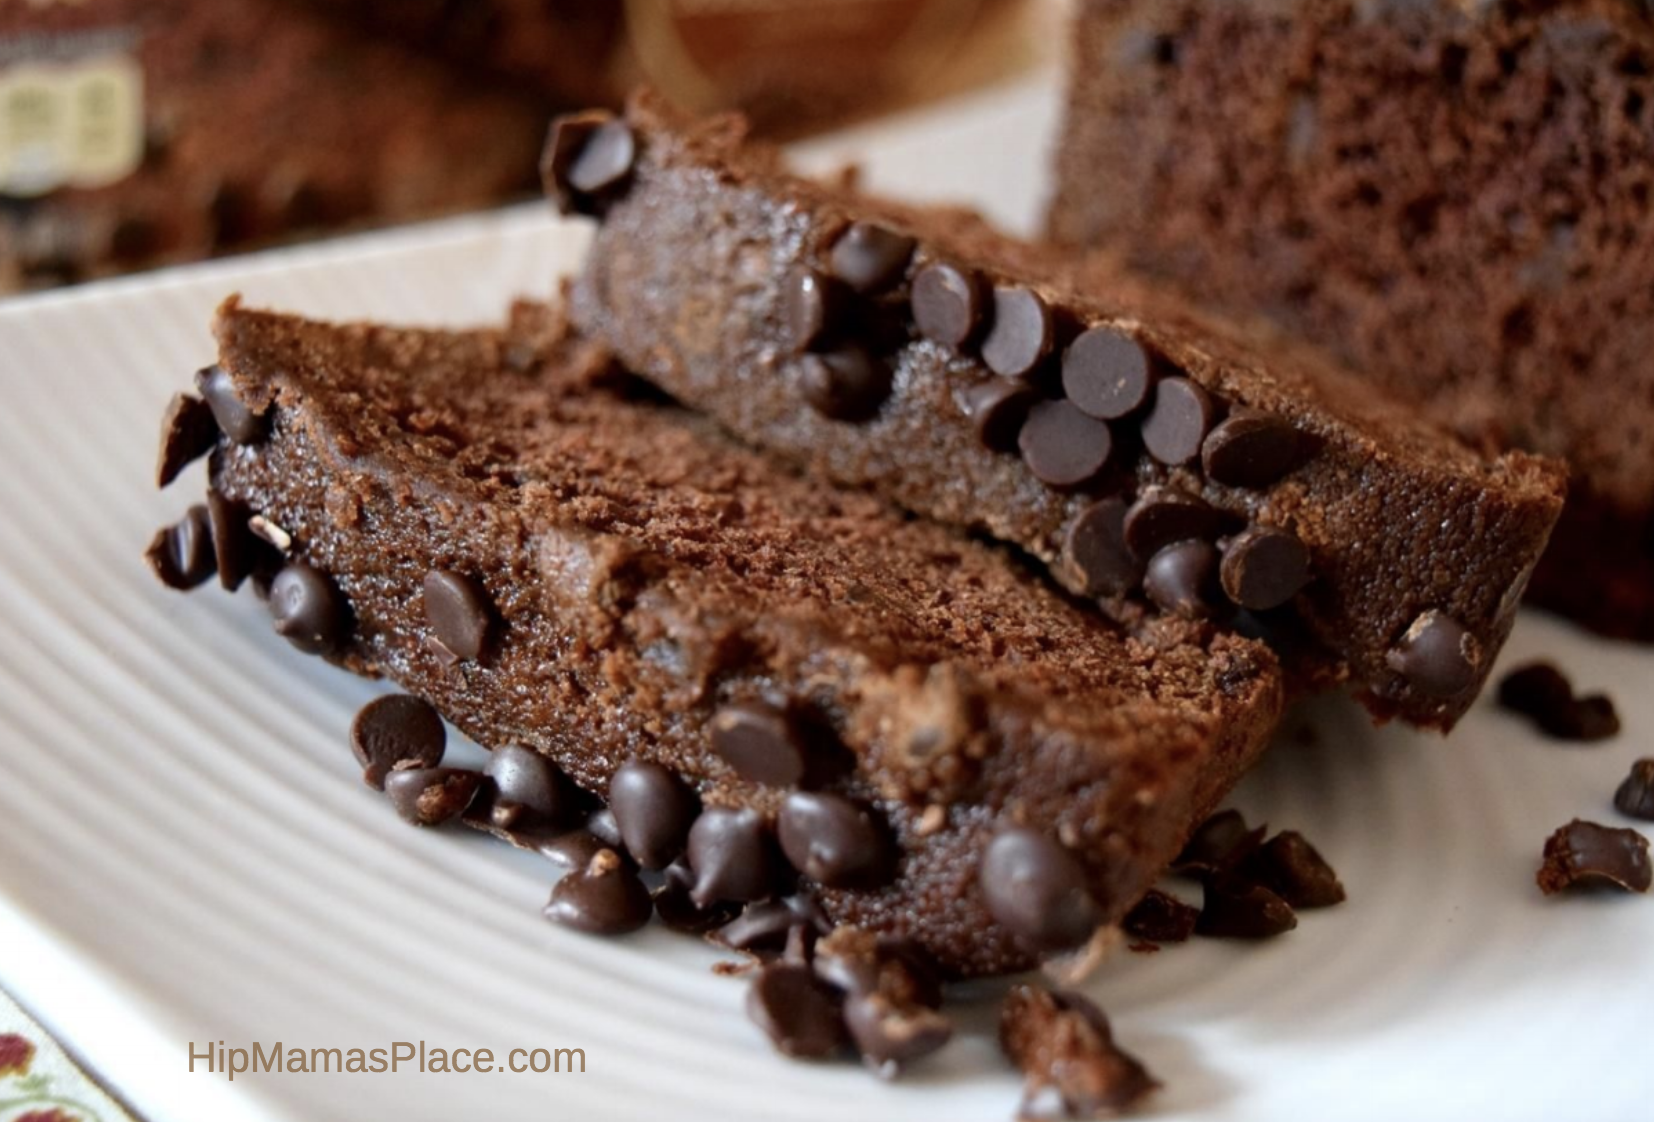 Made with real ingredients like cocoa, sour cream, and semi-sweet chocolate chips, the Marie Callender's loaf cake has a decadent, homemade taste and contains no artificial flavors or artificial preservatives.